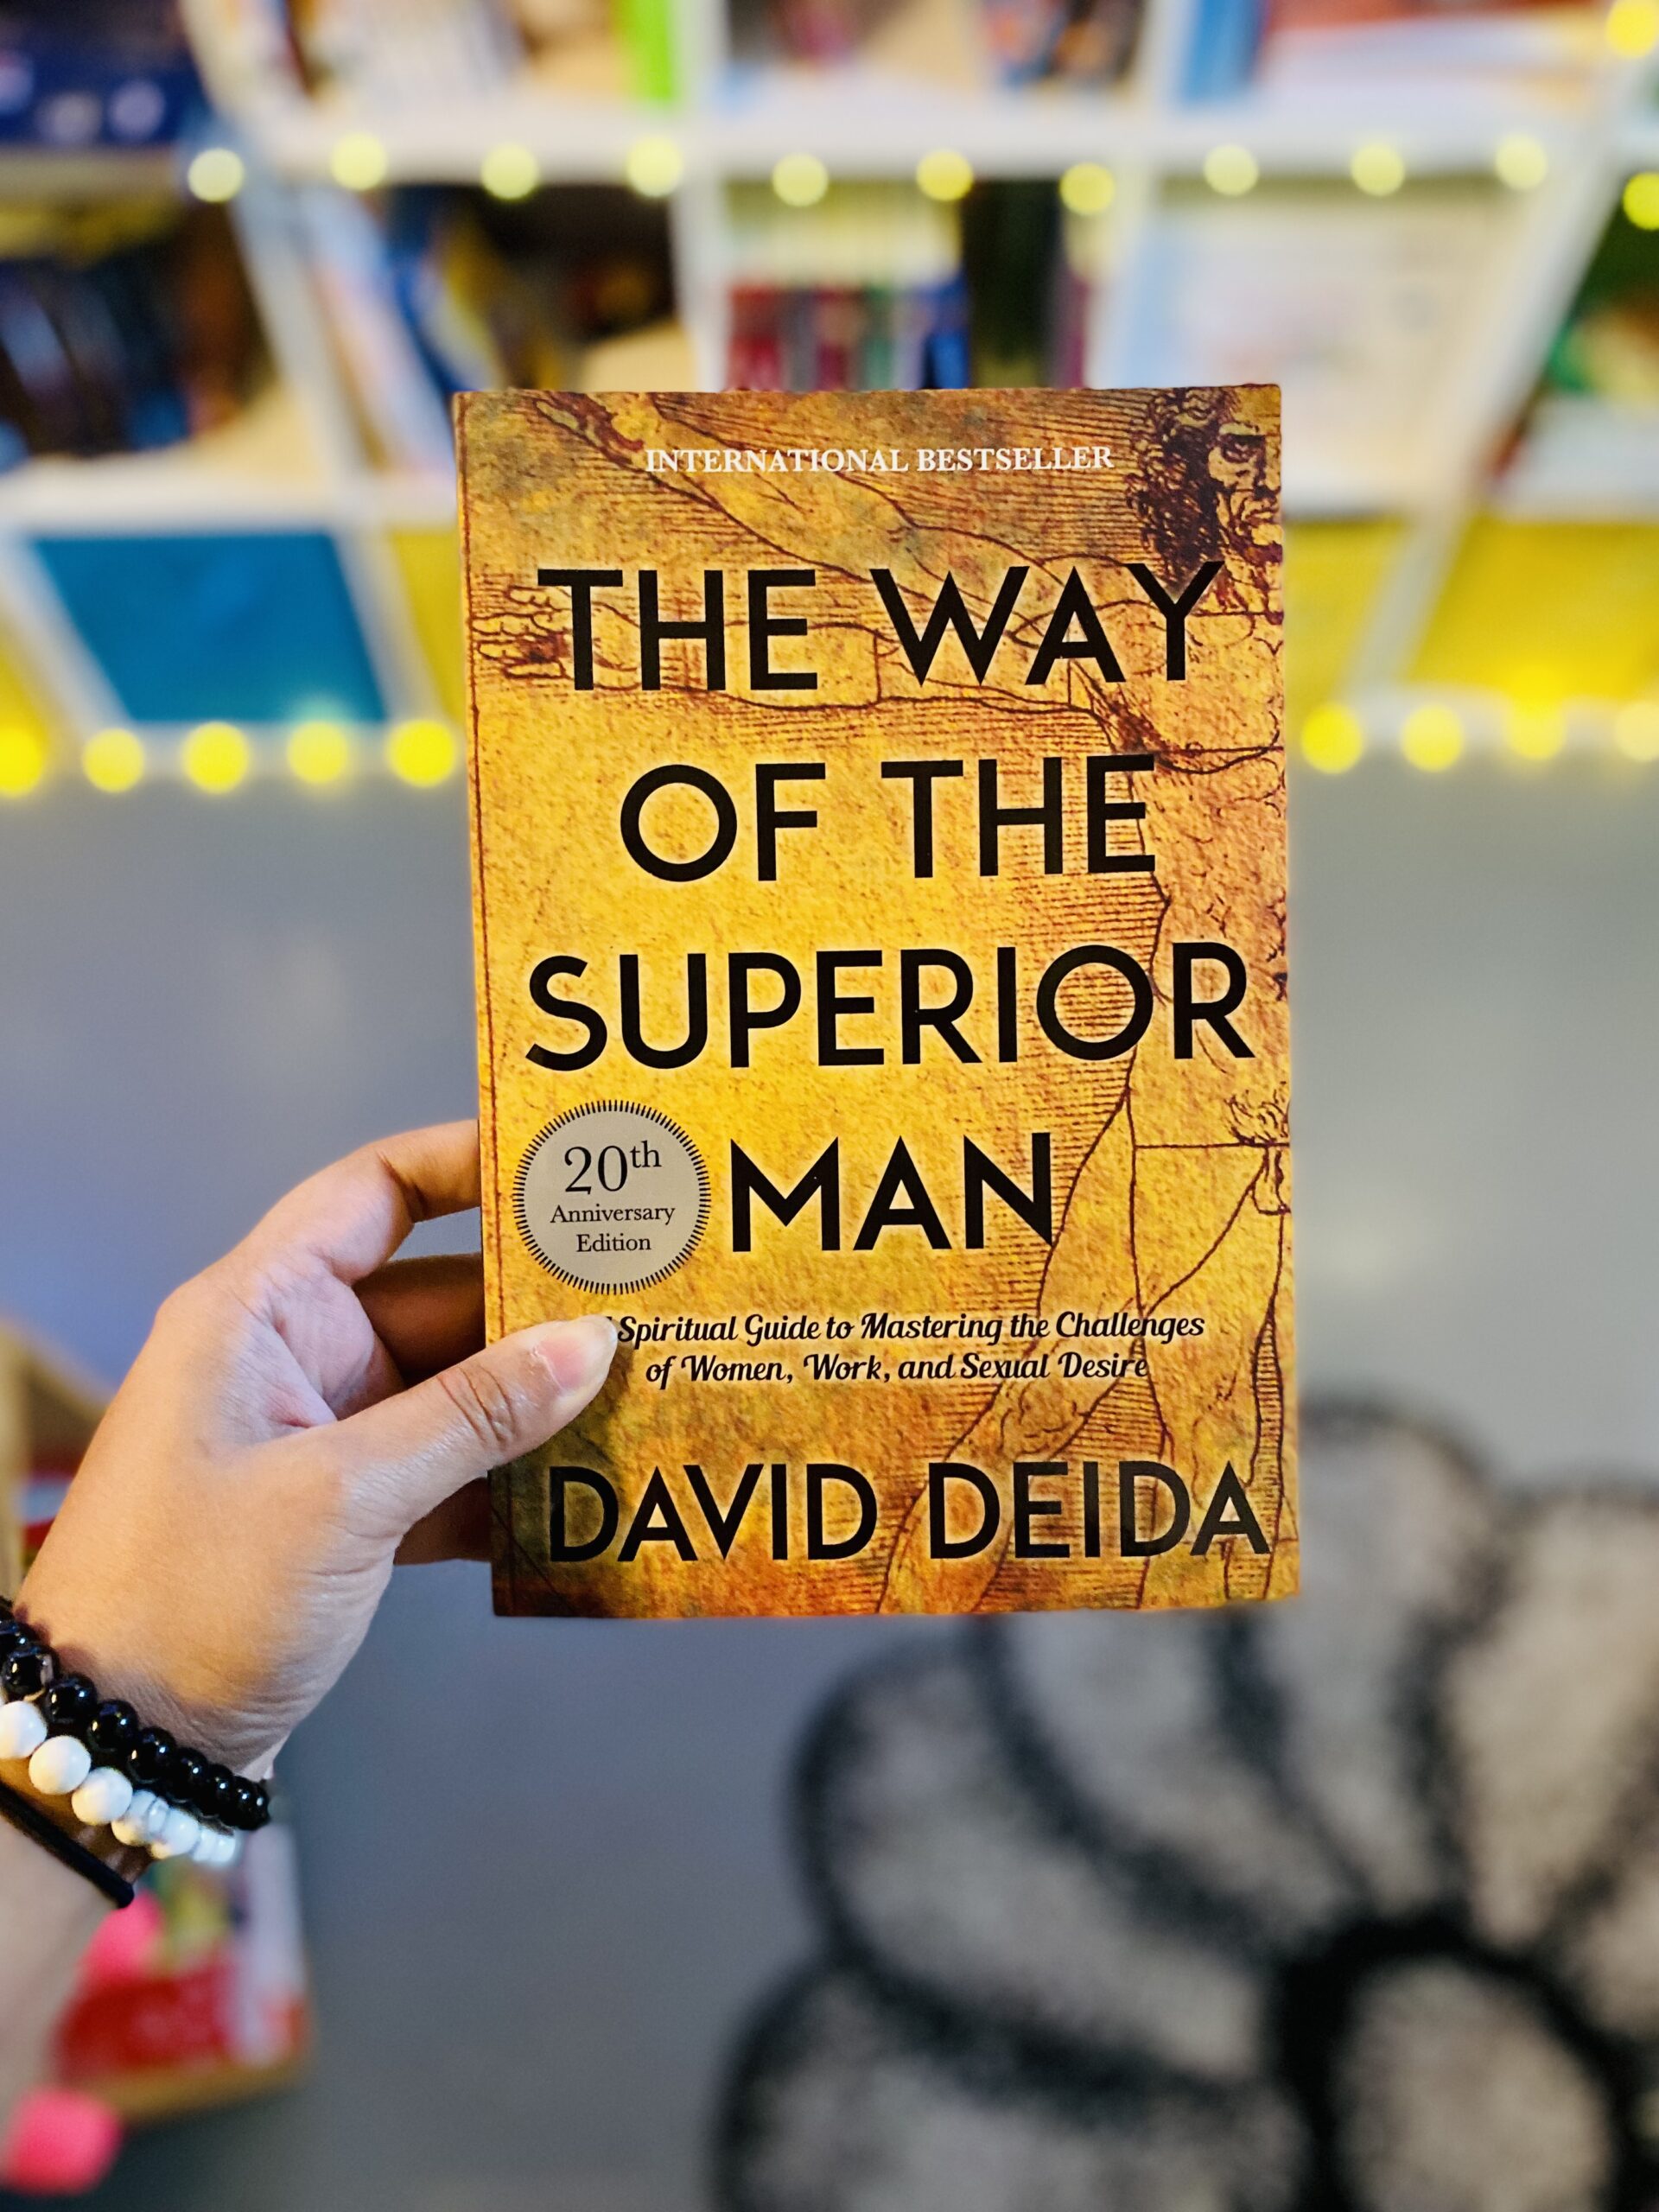 The Way of the Superior Man: A Spiritual Guide to Mastering the Challenges  of Women, Work, and Sexual Desire (20th Anniversary Edition) by David Deida  - Scribbles and Quills